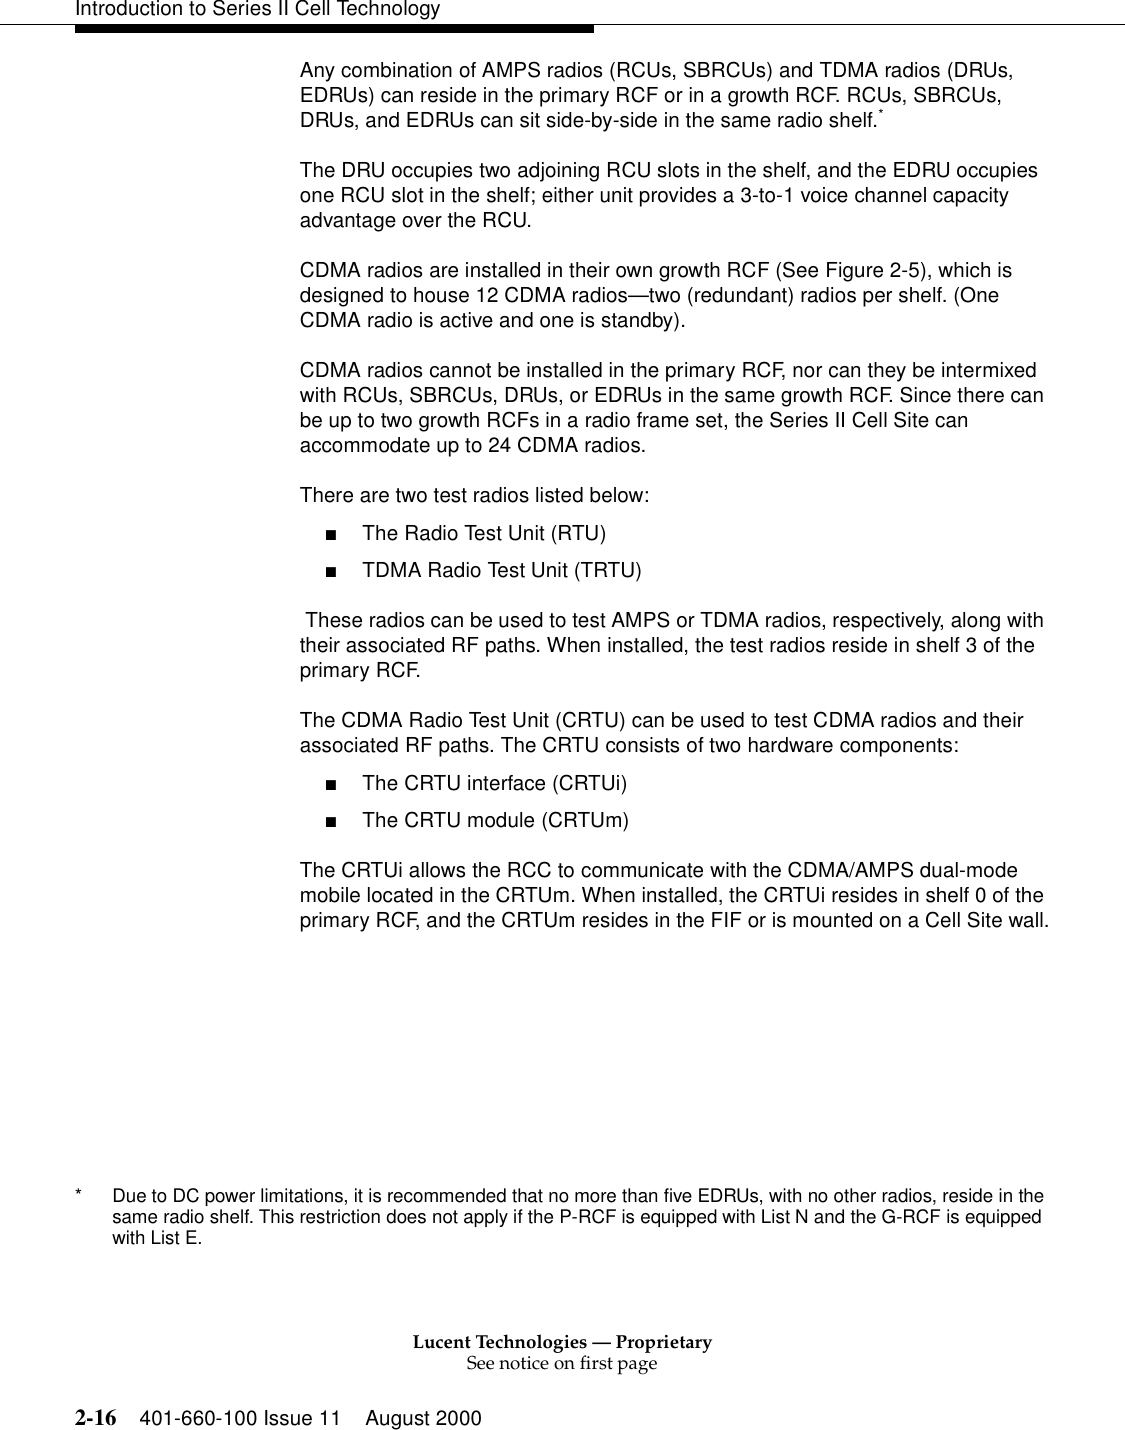 Lucent Technologies — ProprietarySee notice on first page2-16 401-660-100 Issue 11 August 2000Introduction to Series II Cell TechnologyAny combination of AMPS radios (RCUs, SBRCUs) and TDMA radios (DRUs, EDRUs) can reside in the primary RCF or in a growth RCF. RCUs, SBRCUs, DRUs, and EDRUs can sit side-by-side in the same radio shelf.* The DRU occupies two adjoining RCU slots in the shelf, and the EDRU occupies one RCU slot in the shelf; either unit provides a 3-to-1 voice channel capacity advantage over the RCU.CDMA radios are installed in their own growth RCF (See Figure 2-5), which is designed to house 12 CDMA radios—two (redundant) radios per shelf. (One CDMA radio is active and one is standby).CDMA radios cannot be installed in the primary RCF, nor can they be intermixed with RCUs, SBRCUs, DRUs, or EDRUs in the same growth RCF. Since there can be up to two growth RCFs in a radio frame set, the Series II Cell Site can accommodate up to 24 CDMA radios.There are two test radios listed below:■The Radio Test Unit (RTU)■TDMA Radio Test Unit (TRTU) These radios can be used to test AMPS or TDMA radios, respectively, along with their associated RF paths. When installed, the test radios reside in shelf 3 of the primary RCF.The CDMA Radio Test Unit (CRTU) can be used to test CDMA radios and their associated RF paths. The CRTU consists of two hardware components:■The CRTU interface (CRTUi) ■The CRTU module (CRTUm)The CRTUi allows the RCC to communicate with the CDMA/AMPS dual-mode mobile located in the CRTUm. When installed, the CRTUi resides in shelf 0 of the primary RCF, and the CRTUm resides in the FIF or is mounted on a Cell Site wall.* Due to DC power limitations, it is recommended that no more than five EDRUs, with no other radios, reside in the same radio shelf. This restriction does not apply if the P-RCF is equipped with List N and the G-RCF is equipped with List E.